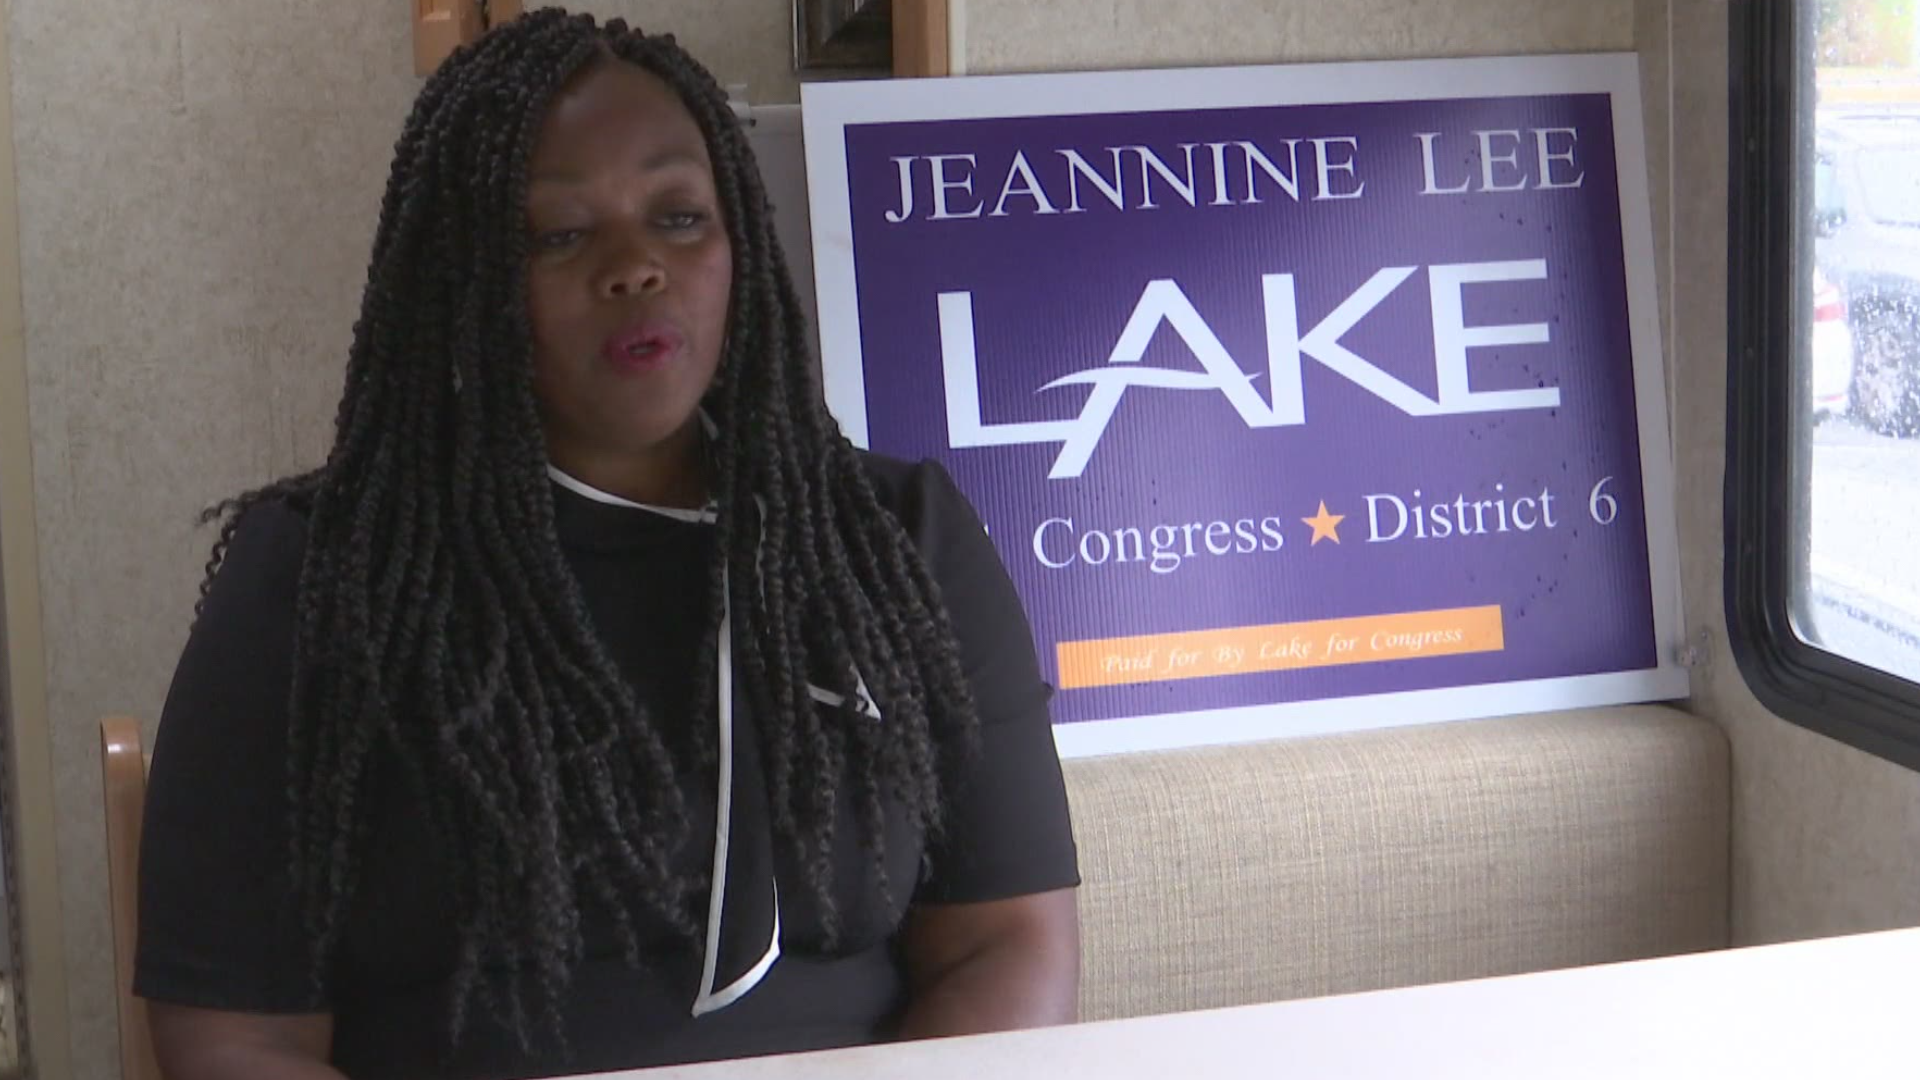 A candidate for an Indiana Congressional seat says she is being harassed.